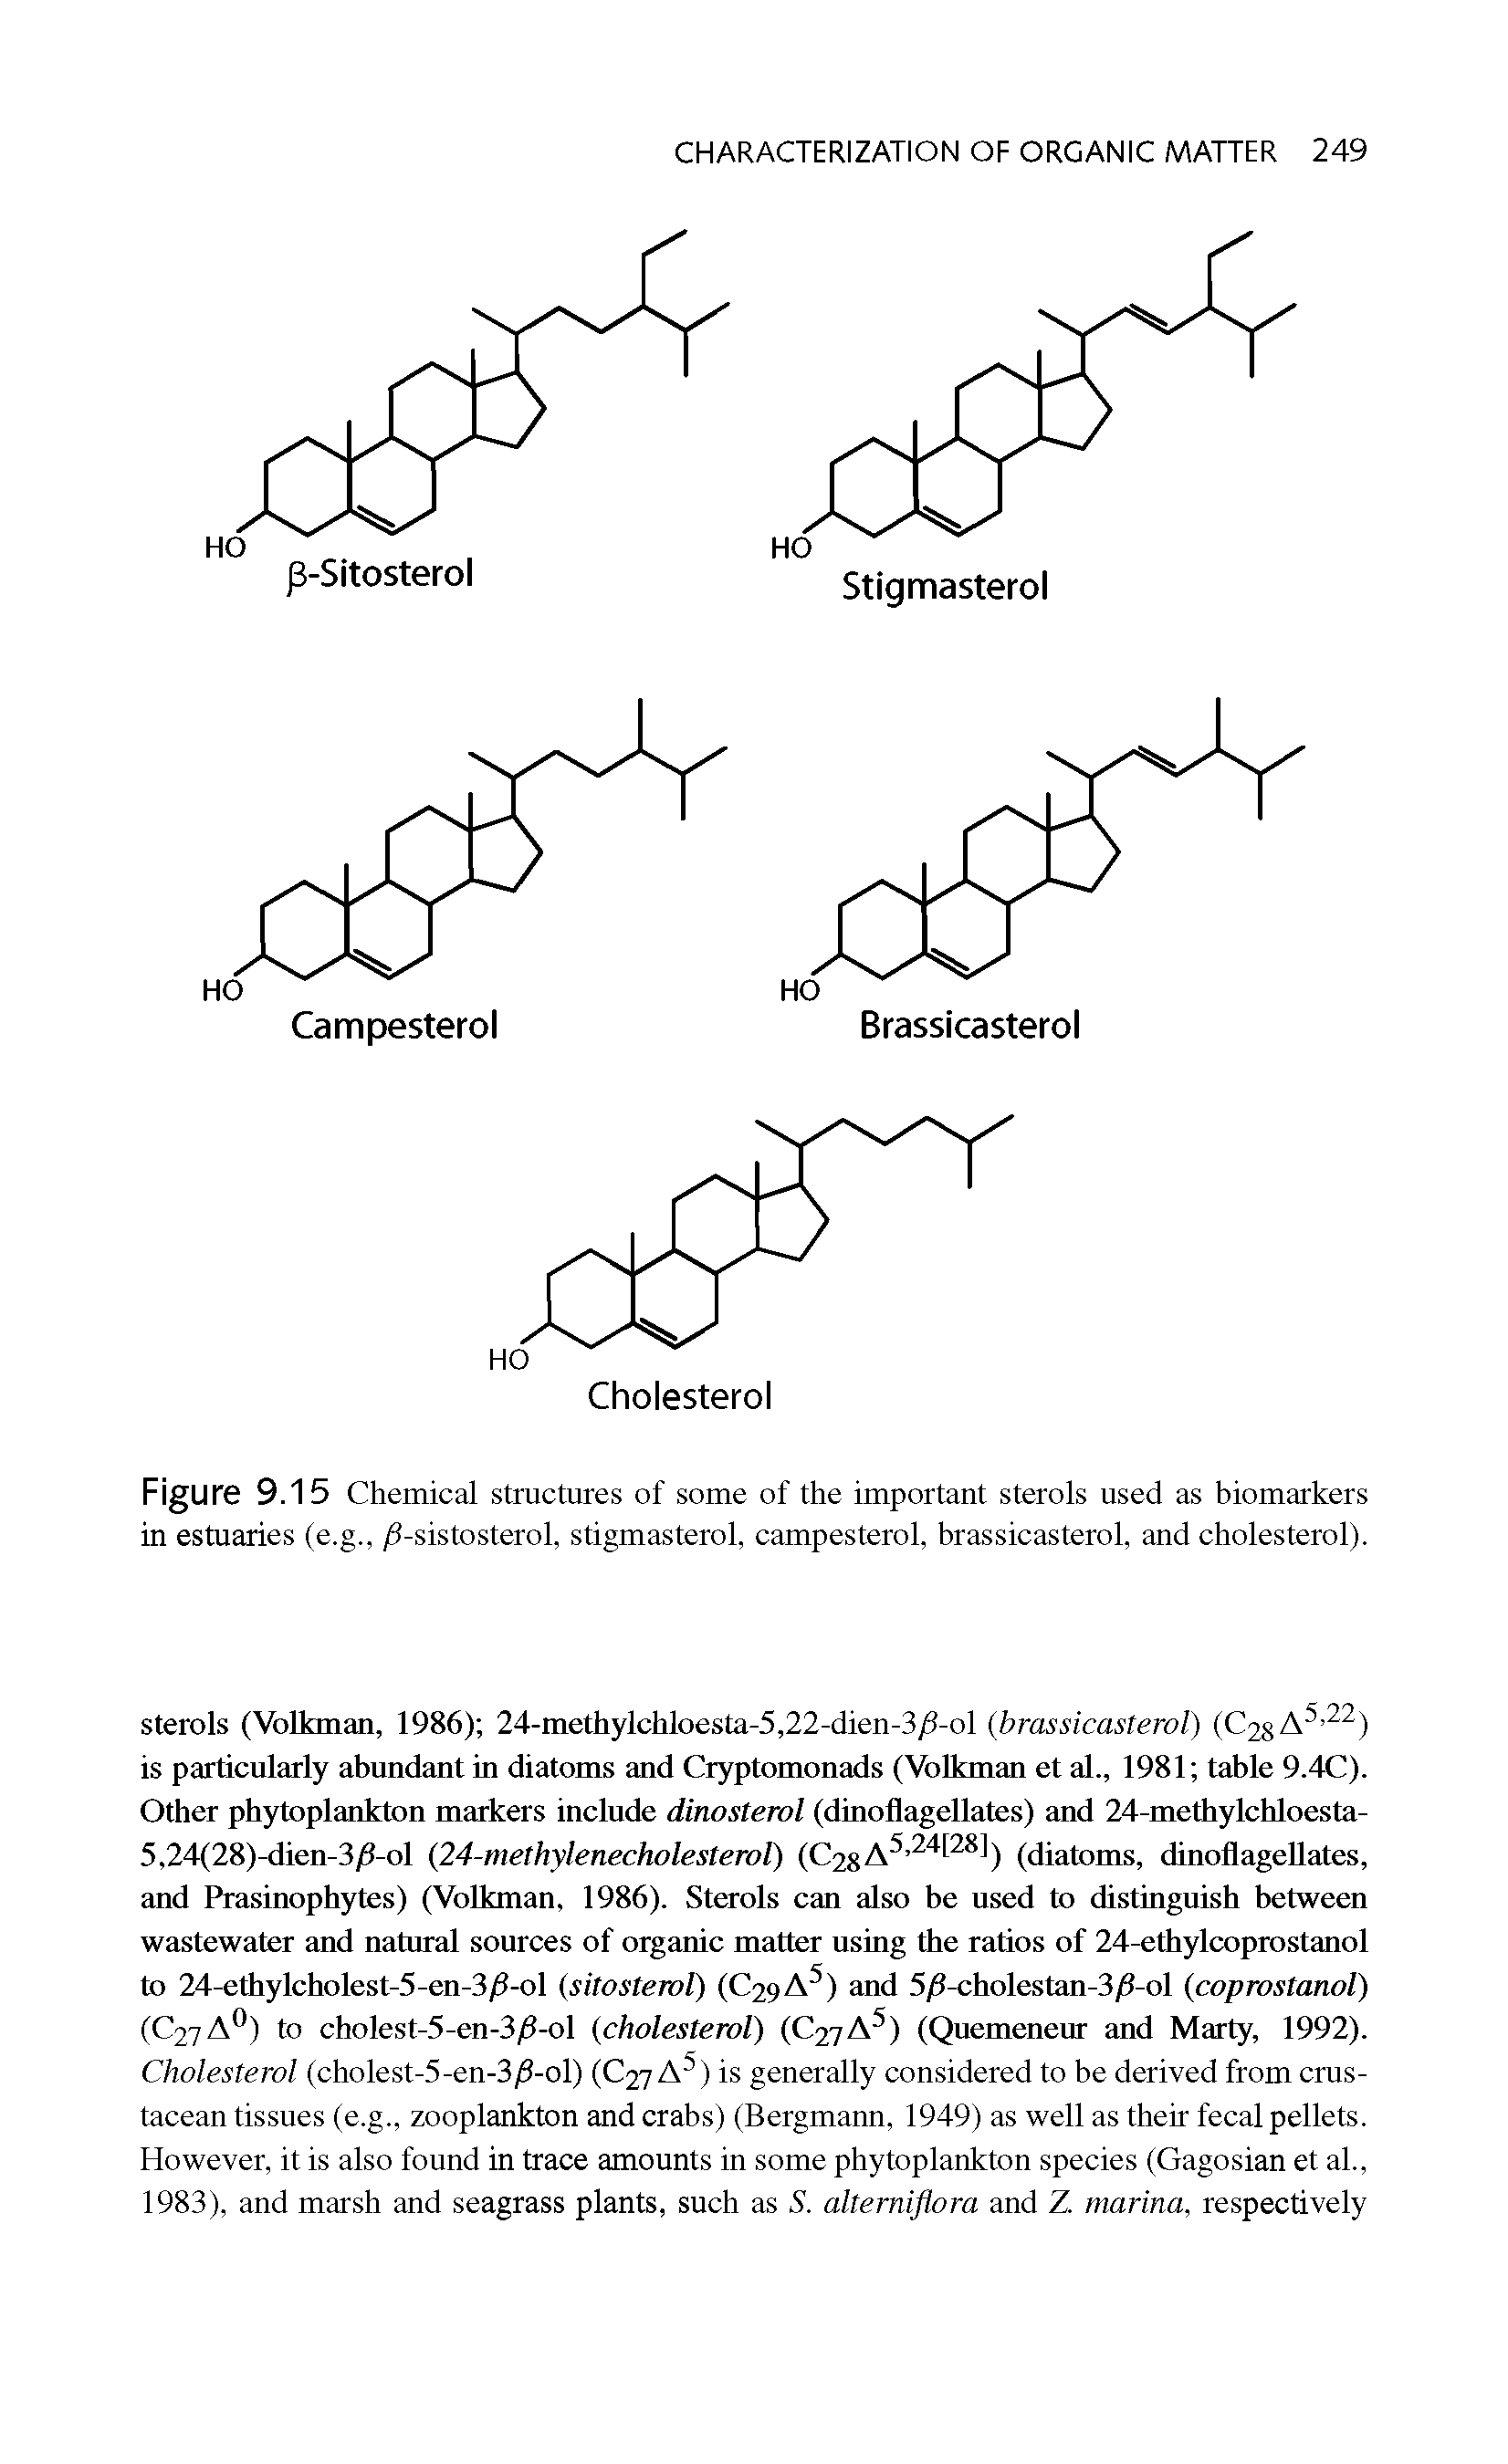 Figure 9.15 Chemical structures of some of the important sterols used as biomarkers in estuaries (e.g., /3-sistosterol, stigmasterol, campesterol, brassicasterol, and cholesterol).